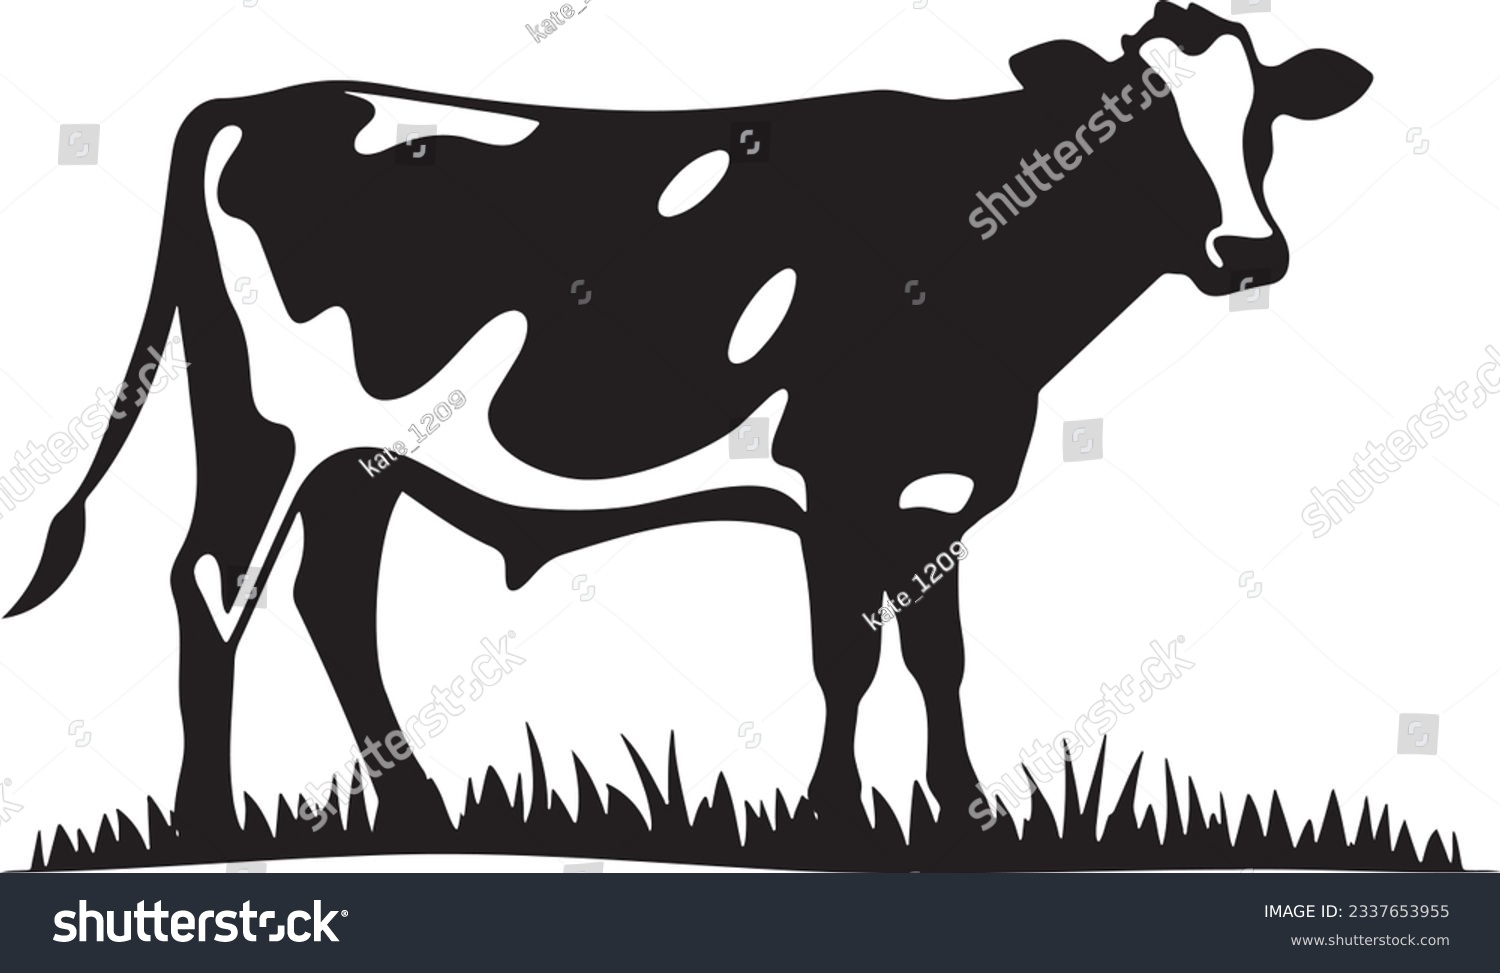 SVG of Cow grazing in a field, Basic simple Minimalist vector SVG graphic, isolated on white background, black and white svg